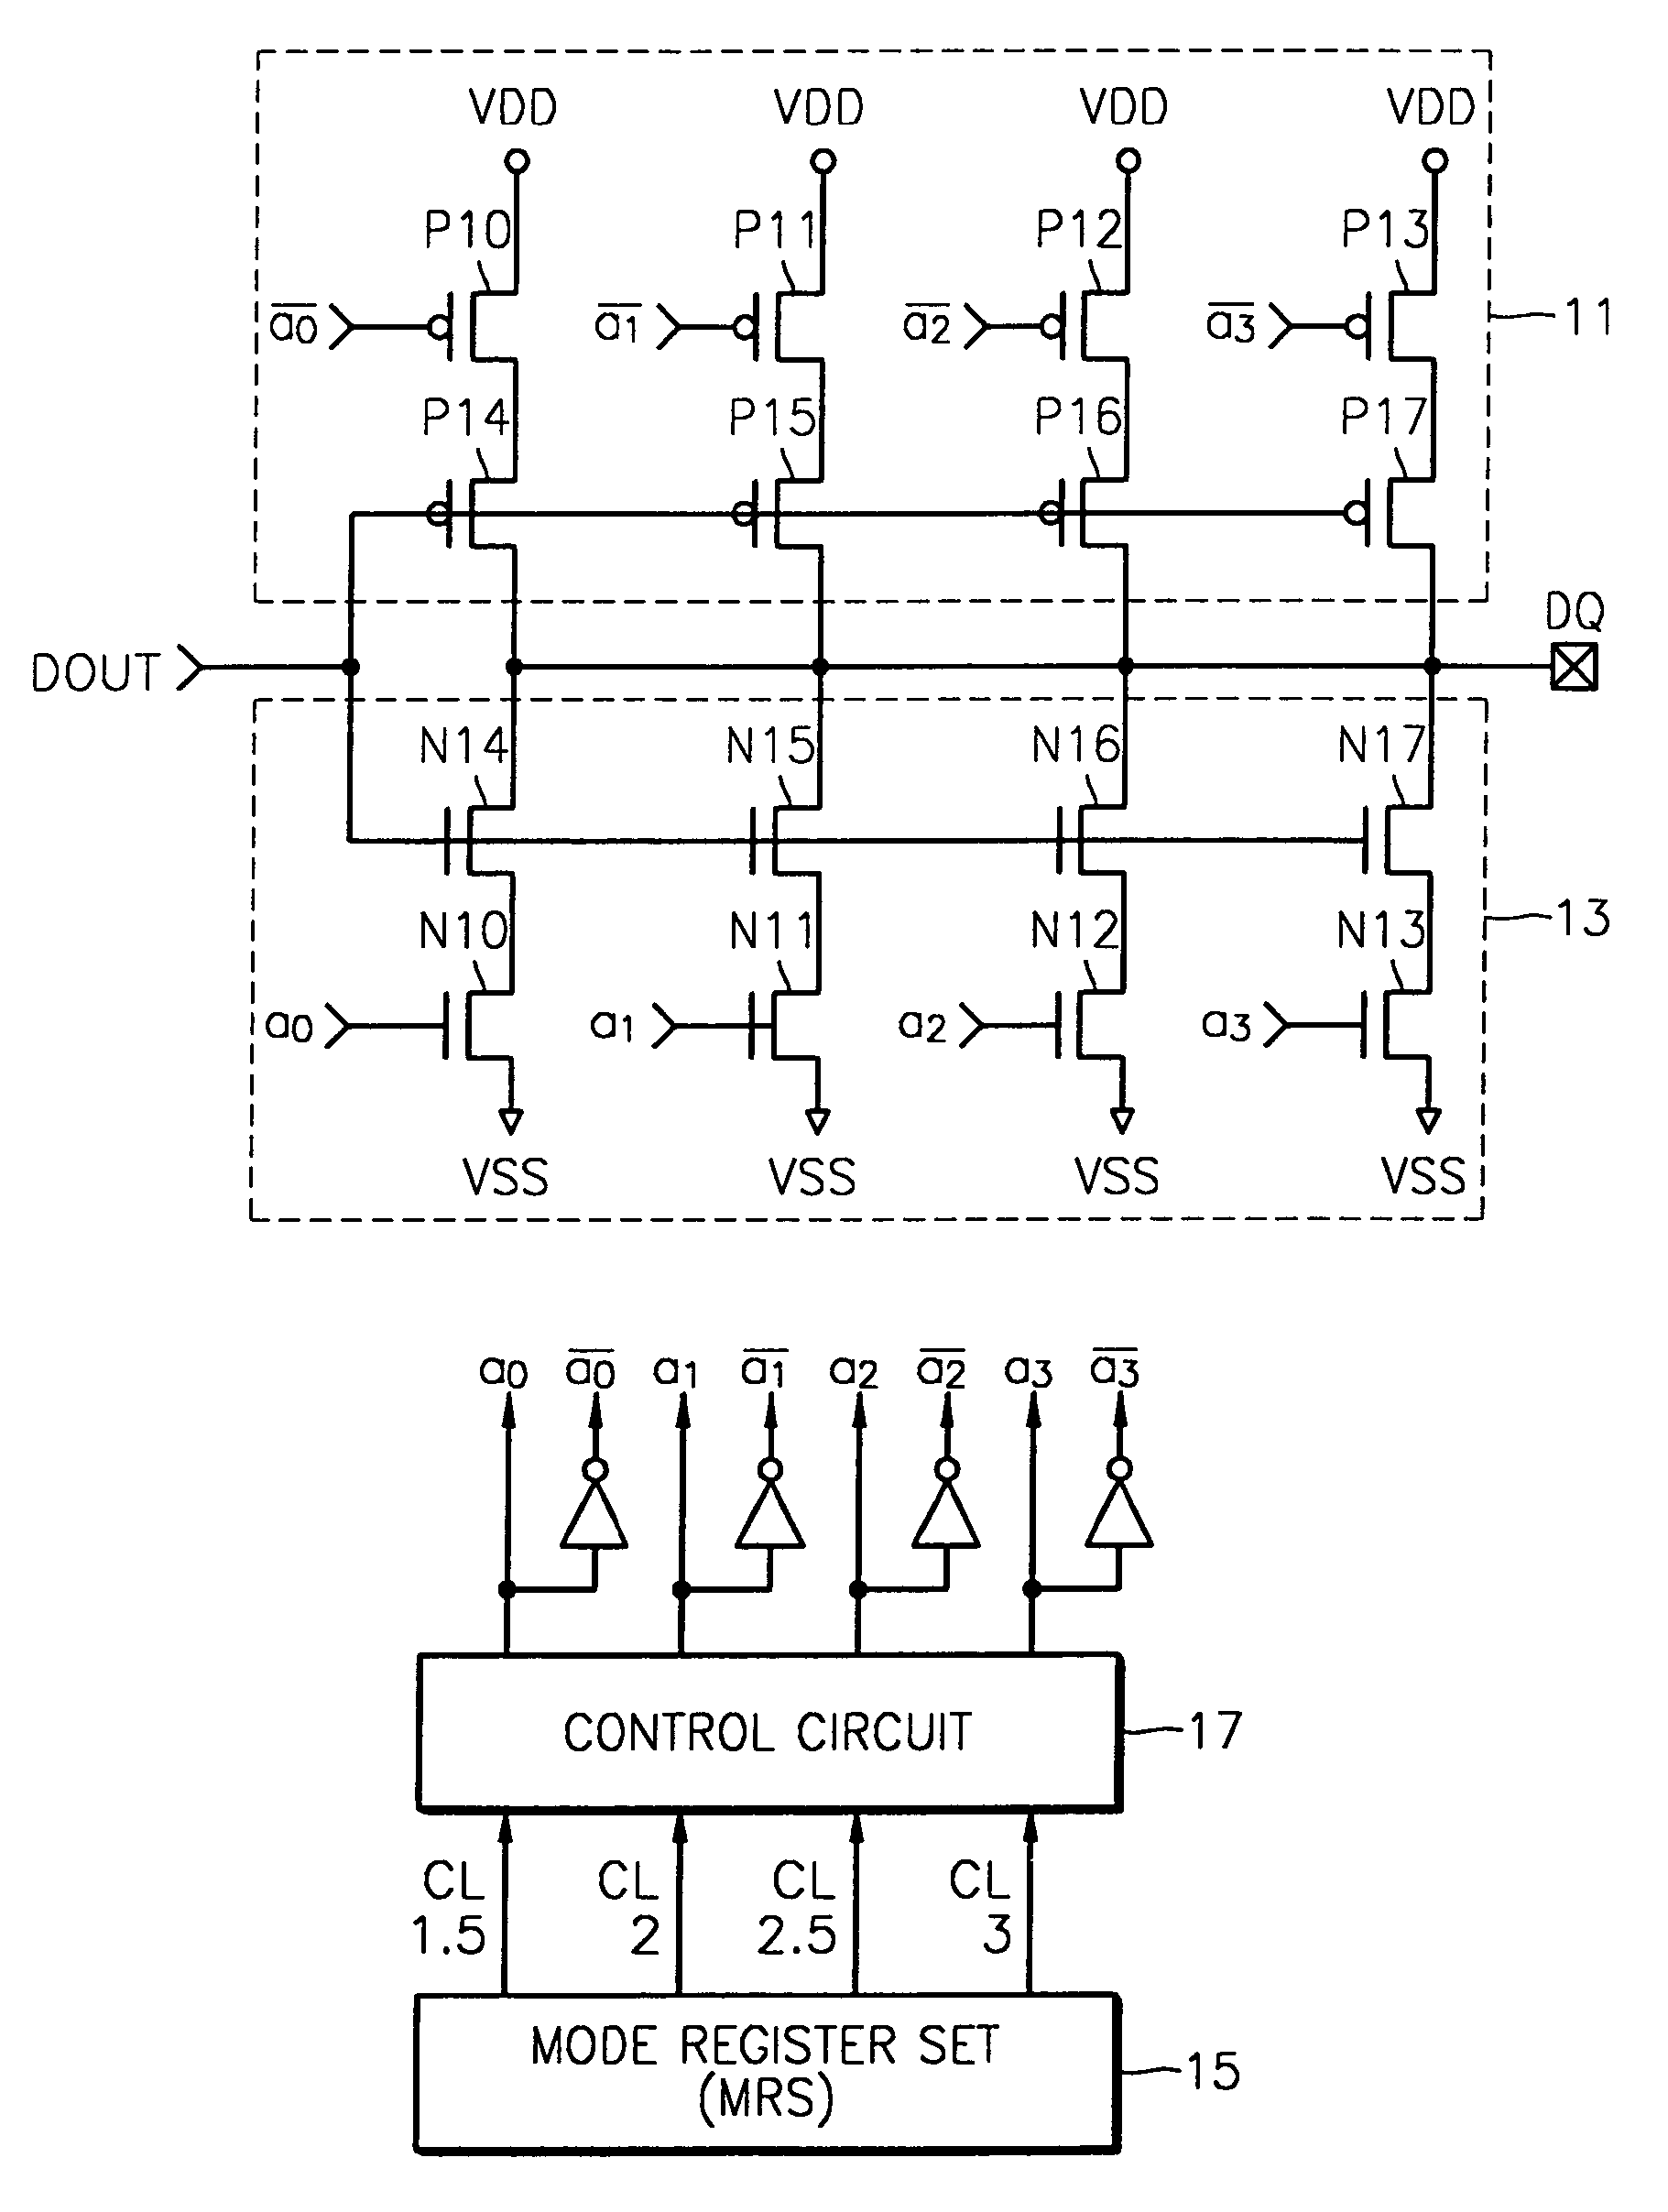 Output driver capable of controlling slew rate of output signal according to operating frequency information or CAS latency information